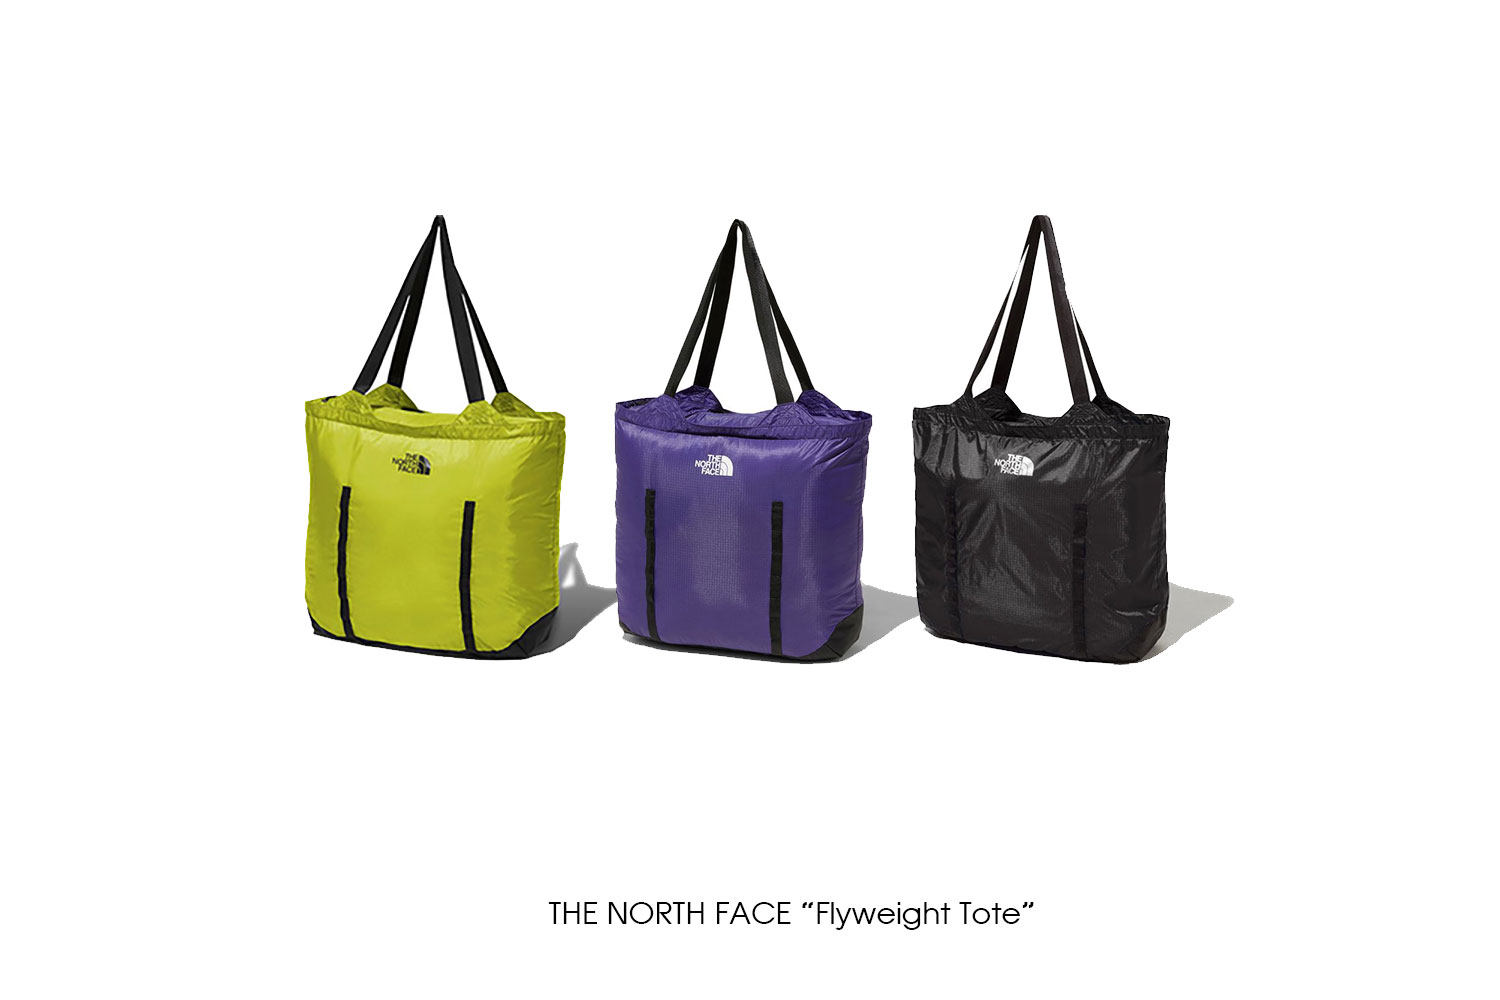 THE NORTH FACE "Flyweight Tote"